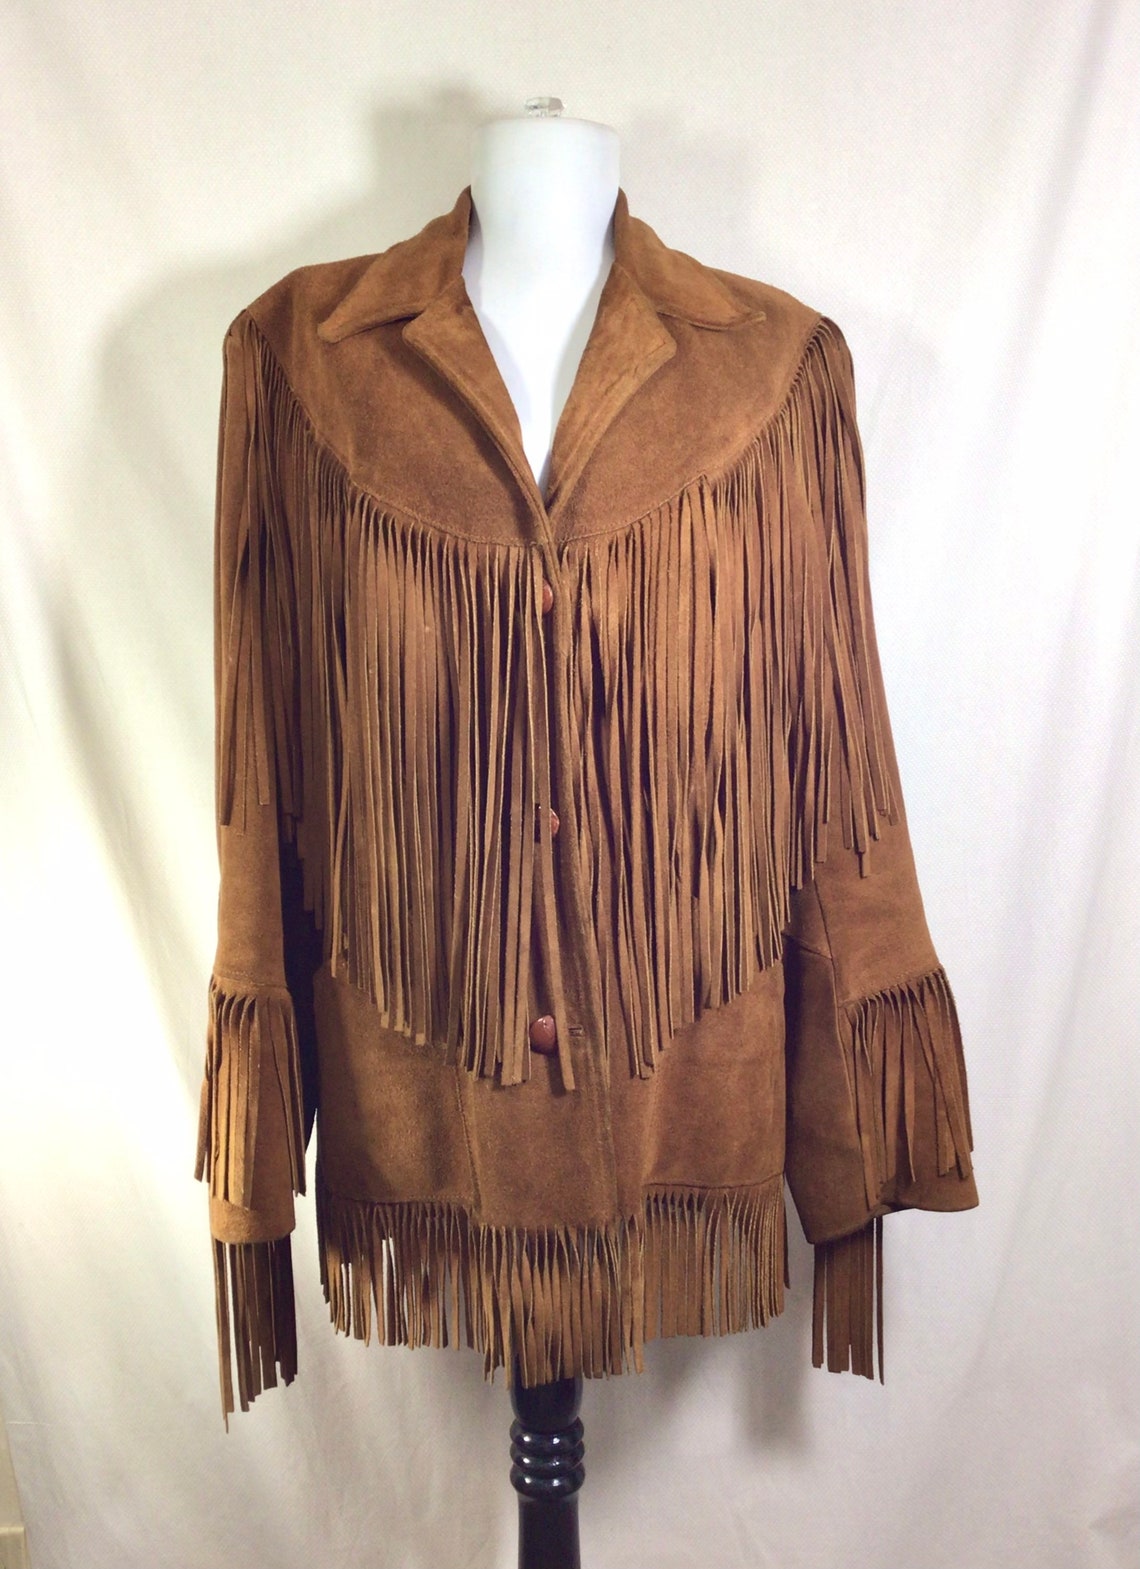 1970s Ms Pioneer Suede Fringed Jacket size M/L | Etsy